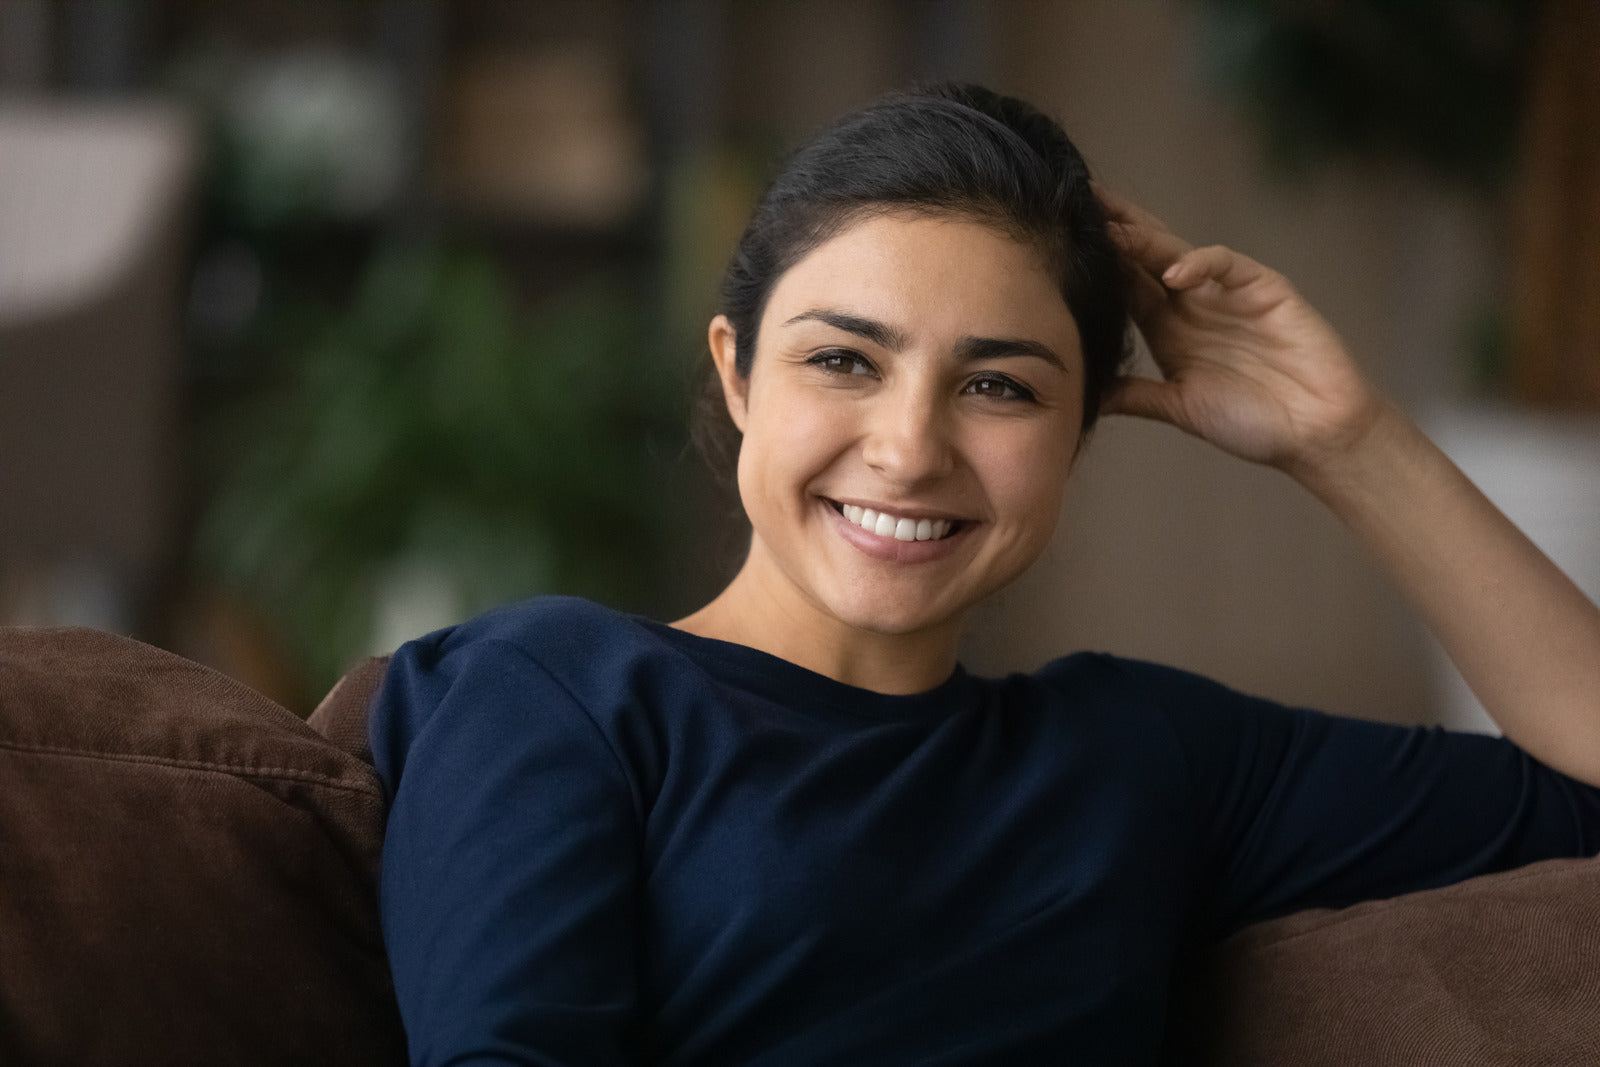 Indian woman sitting on couch smiling and looking off to the side